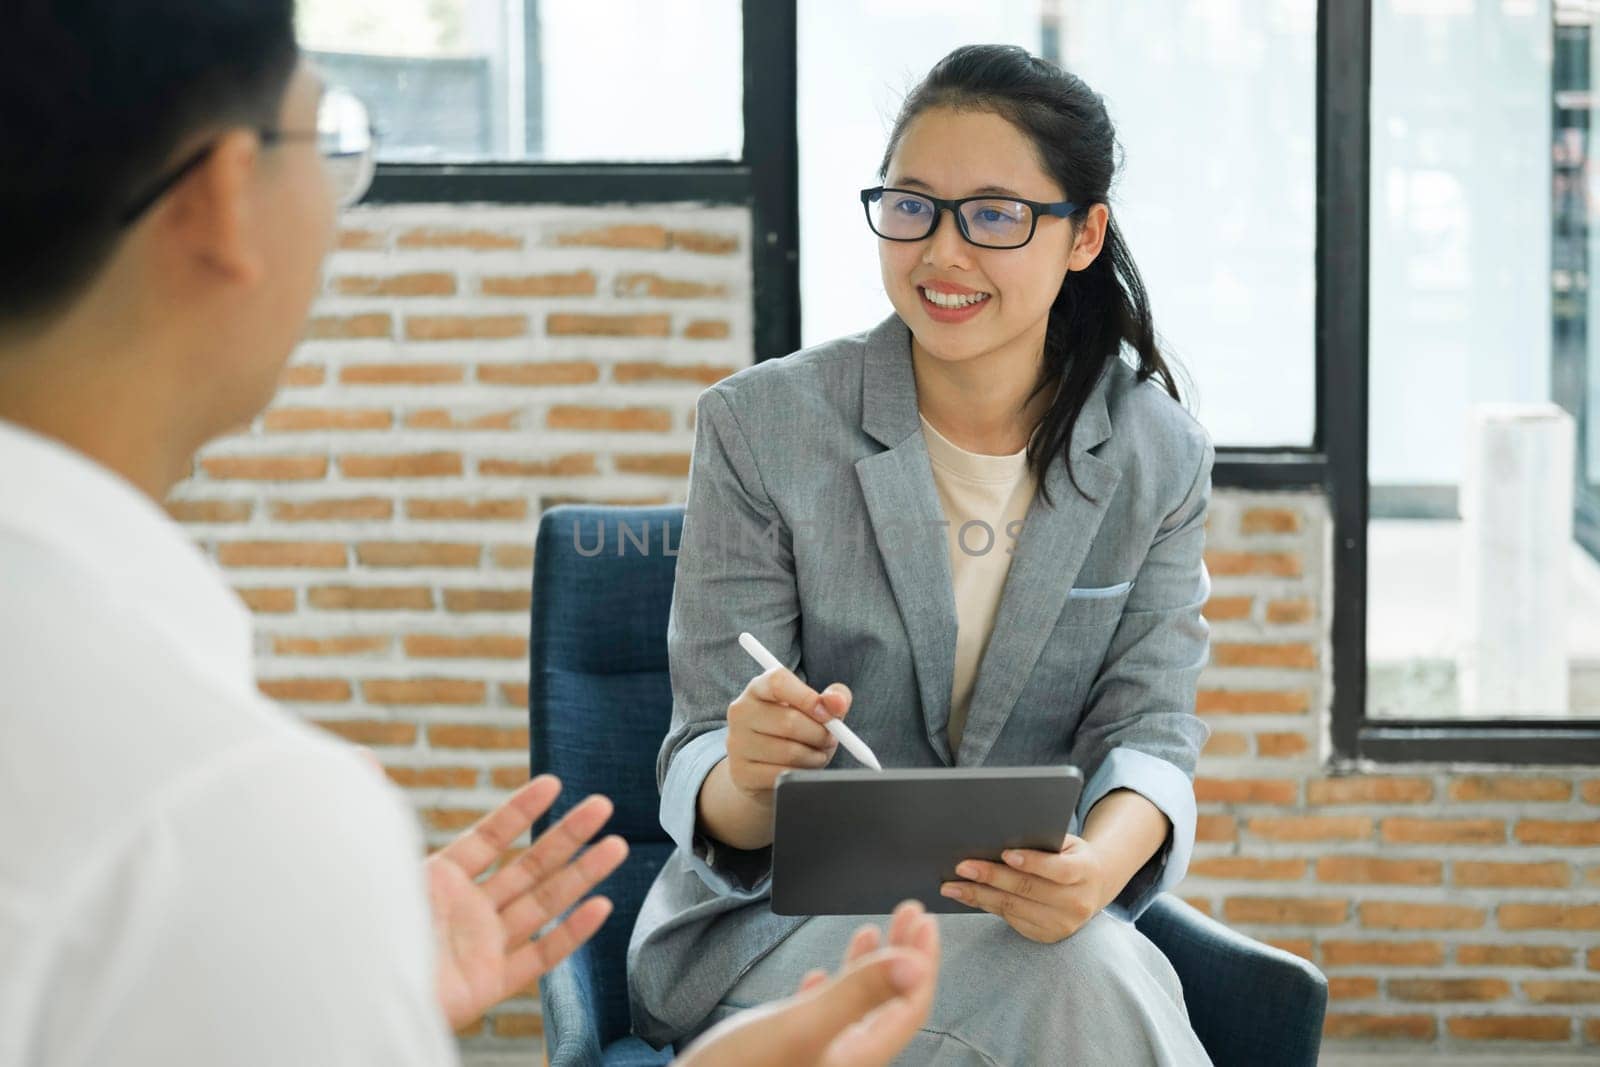 Job Interview, HR manager is interviewing for a job And take job interview notes with a smiley and friendly face to the job applicant. Partnership collaboration, recruitment or lady speaking to hr management for hiring opportunity.